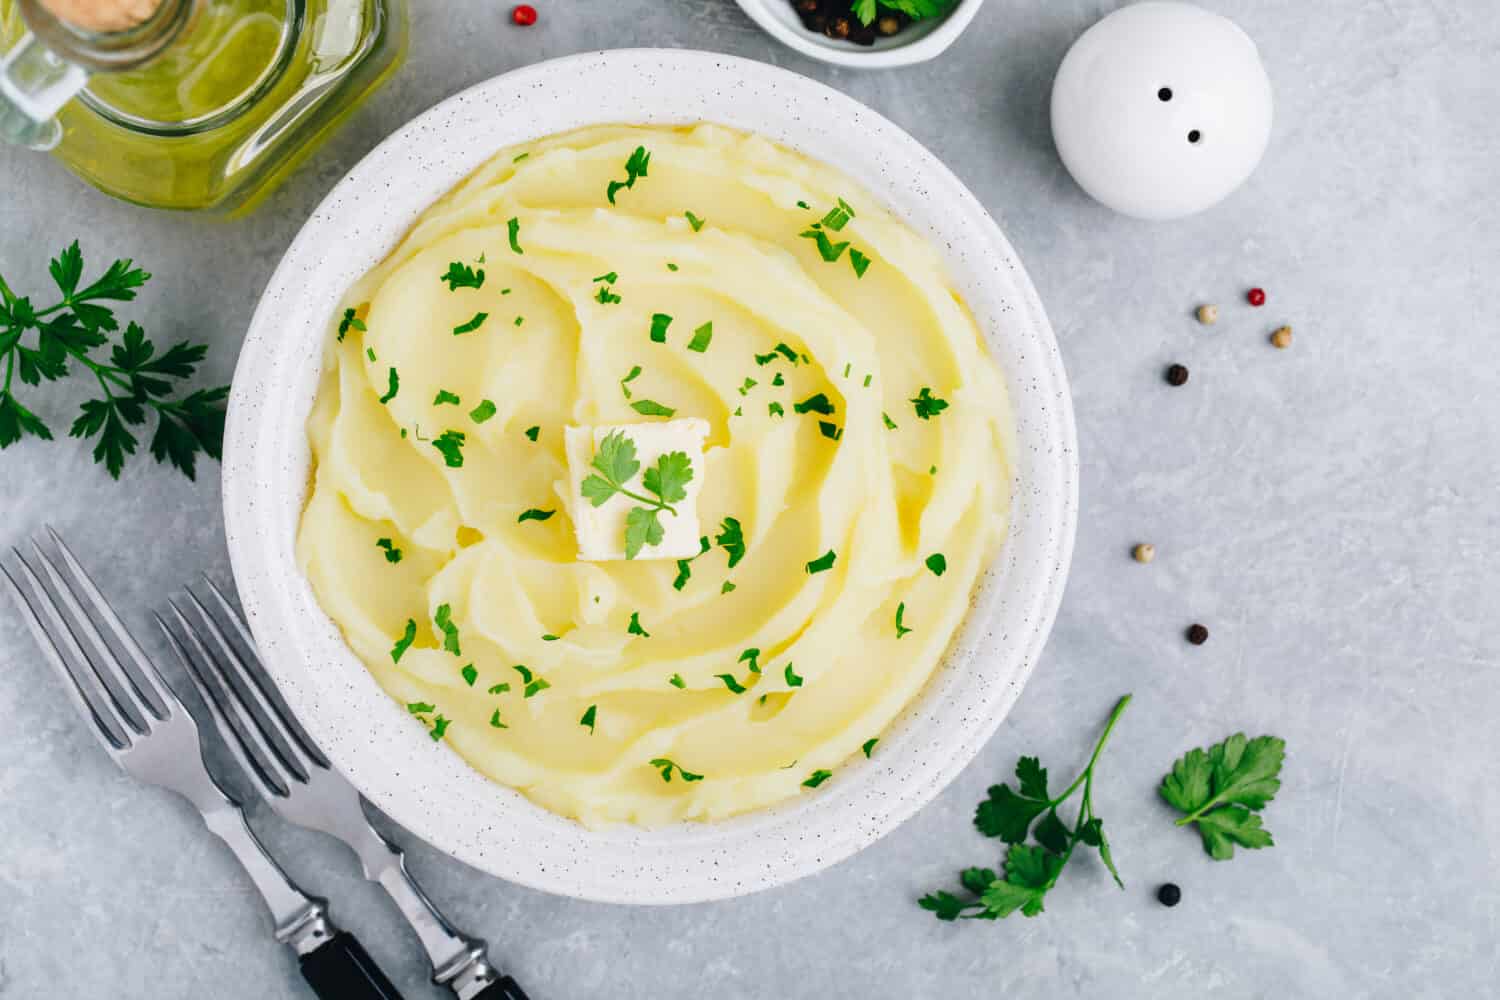 Mashed Potatoes with butter and fresh parsley in a white bowl on gray stone concrete background. Top view, copy space